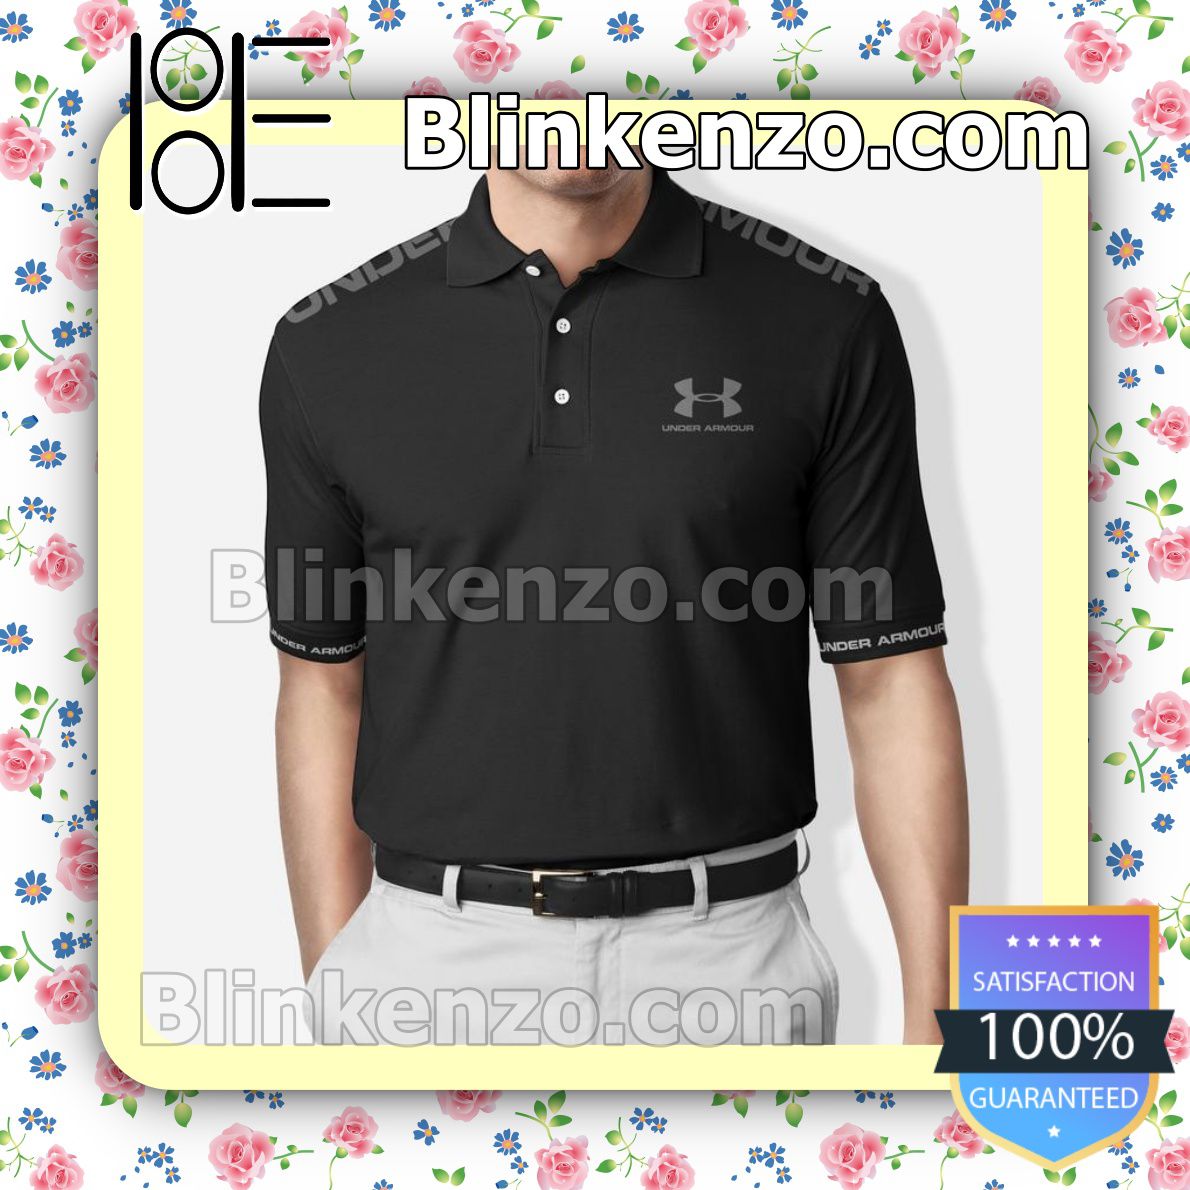 Under Armour Black Basic Embroidered Polo Shirts